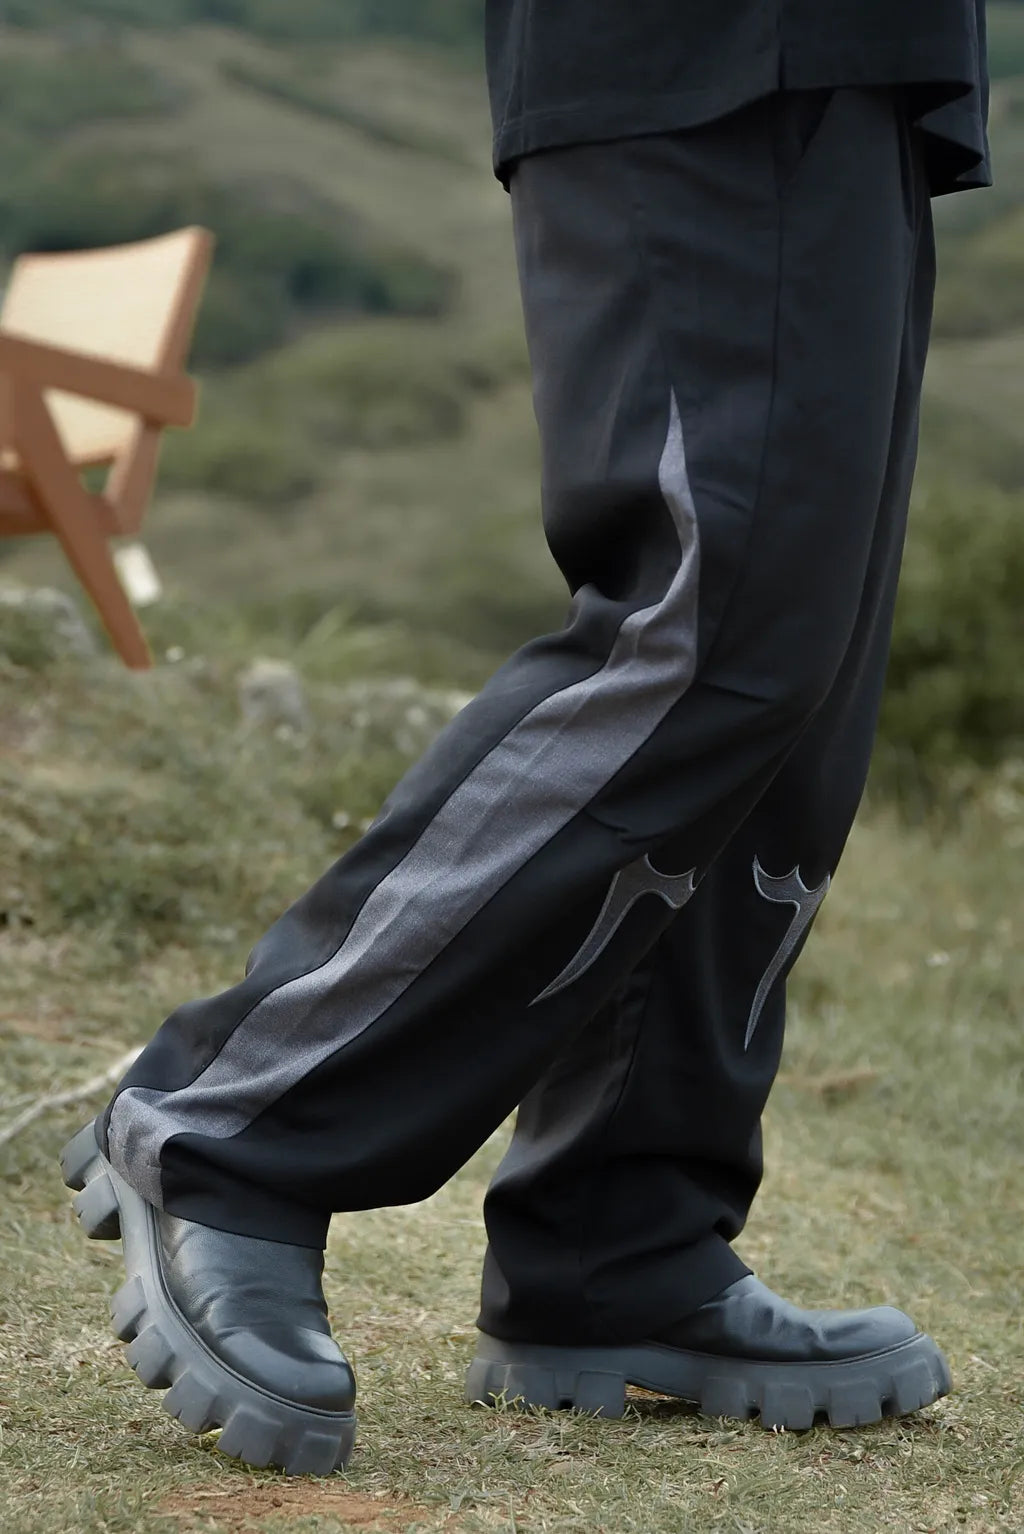 MOMENTUM Spring-Summer 2023 Contrast Panel Trousers 撞色拼接褲